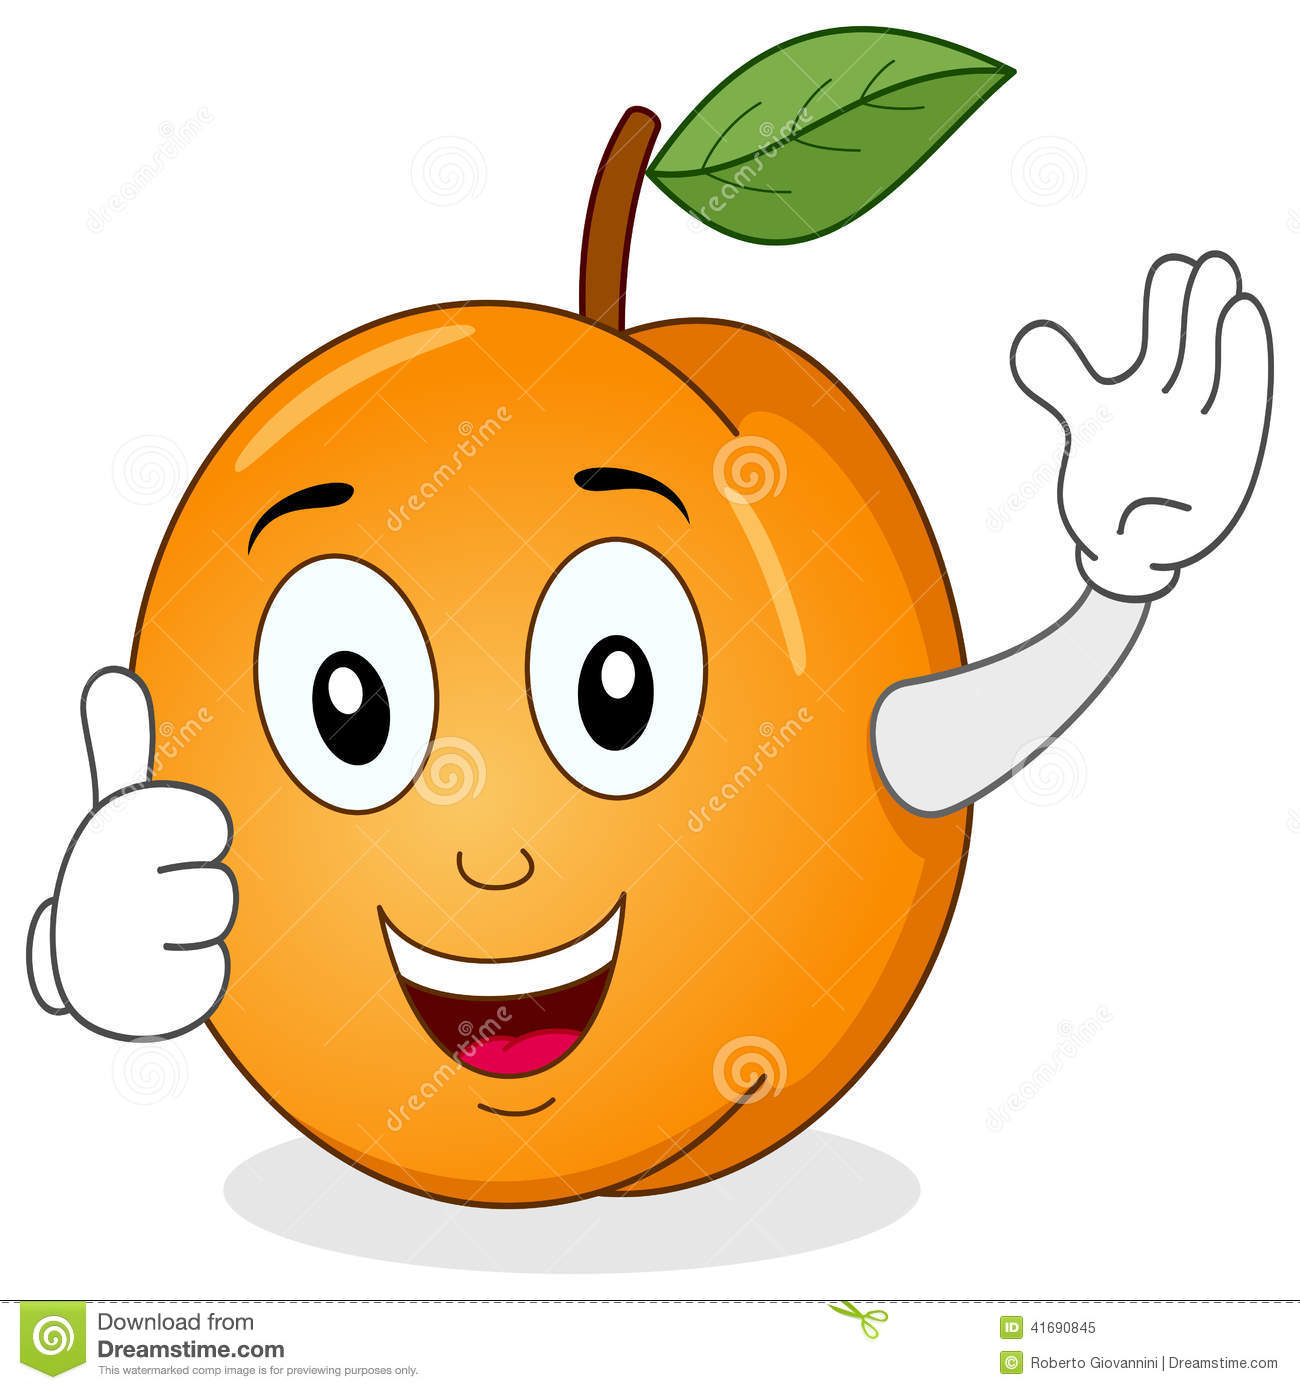 Funny Cartoon Apricot Character Smiling With Thumbs Up Isolated On